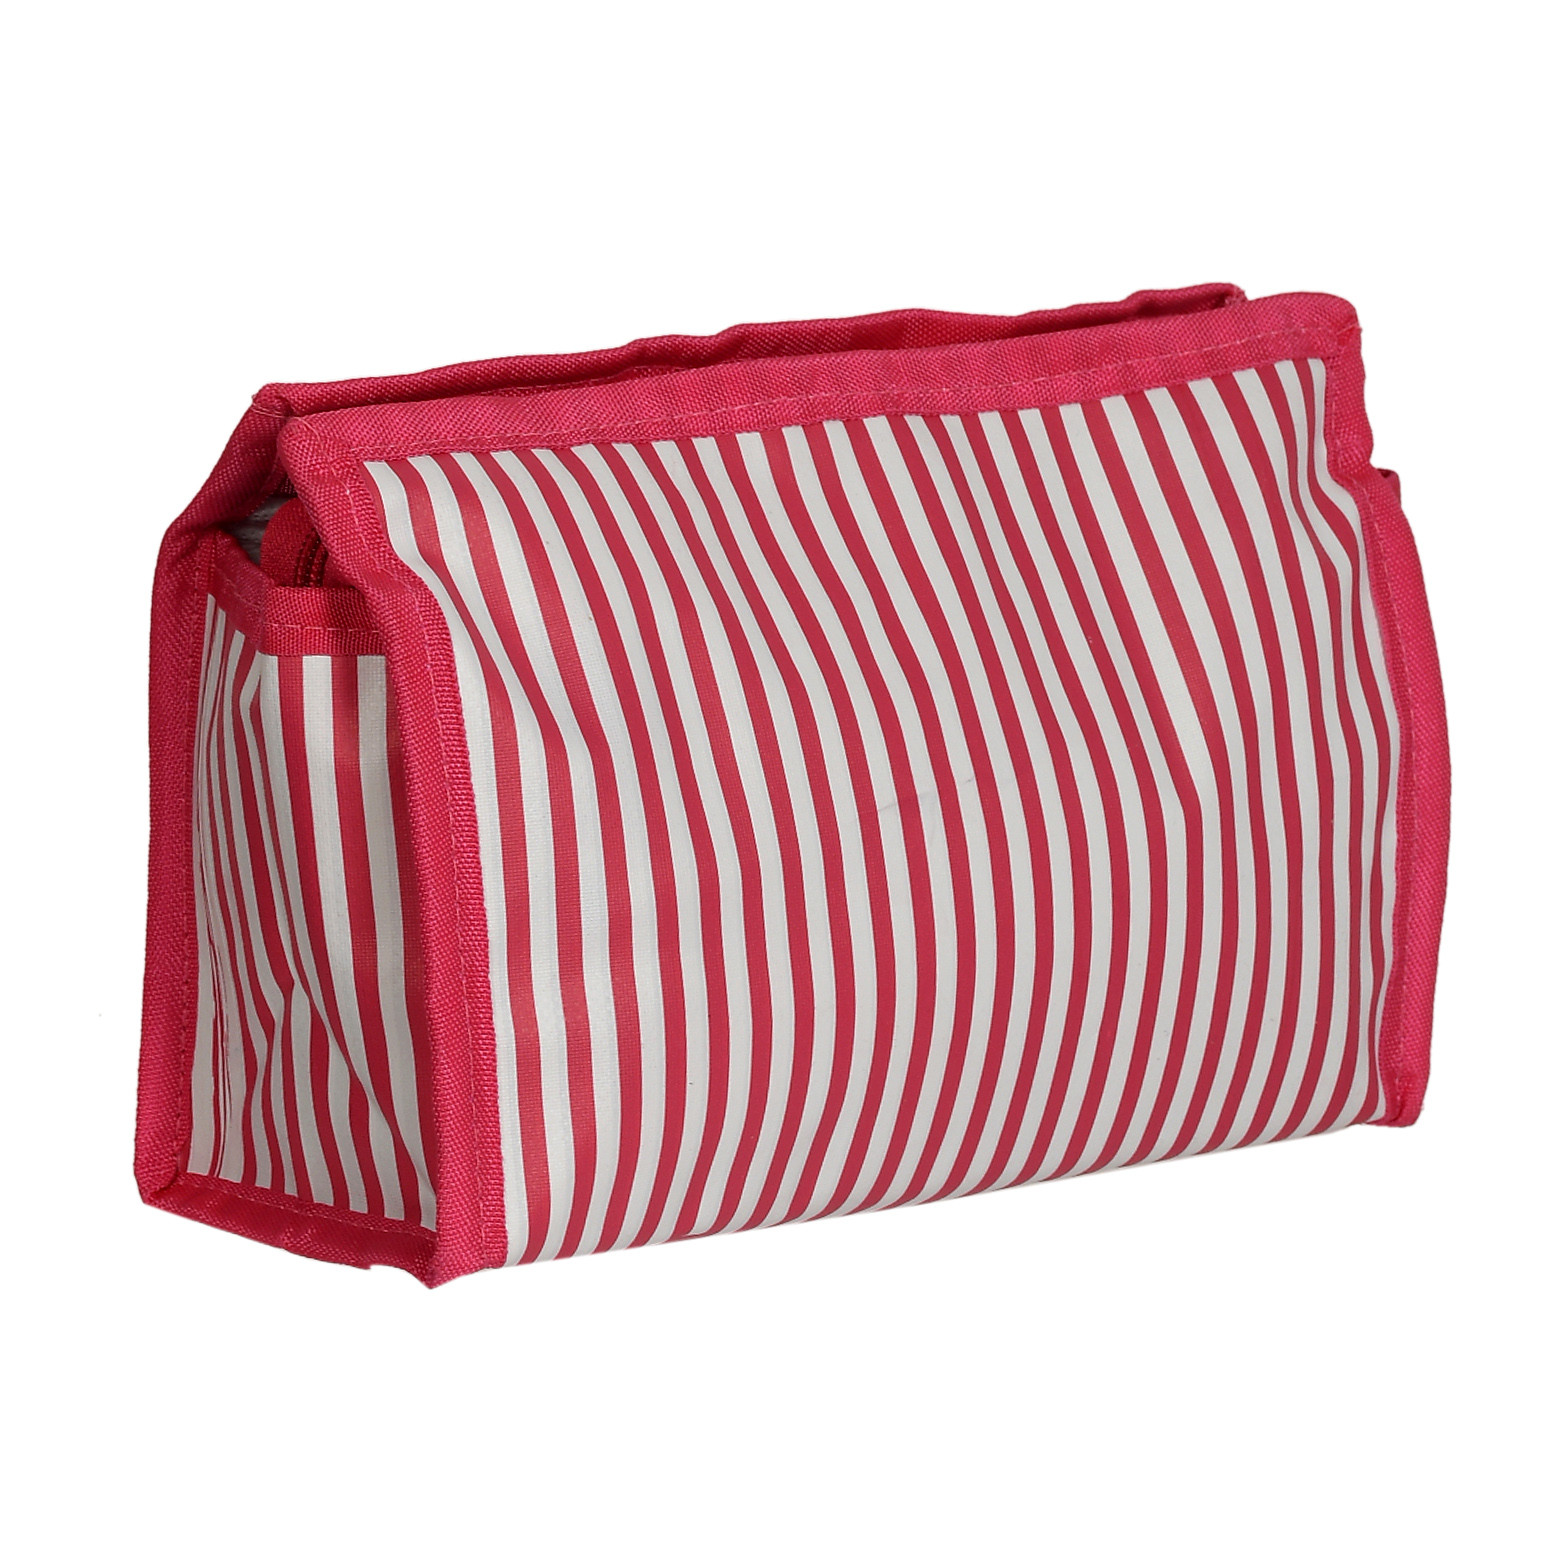 Kuber Industries Lining Print PVC Toiletry Bag For Home & Travelling With 3 Main Zipper (PInk) 54KM4352